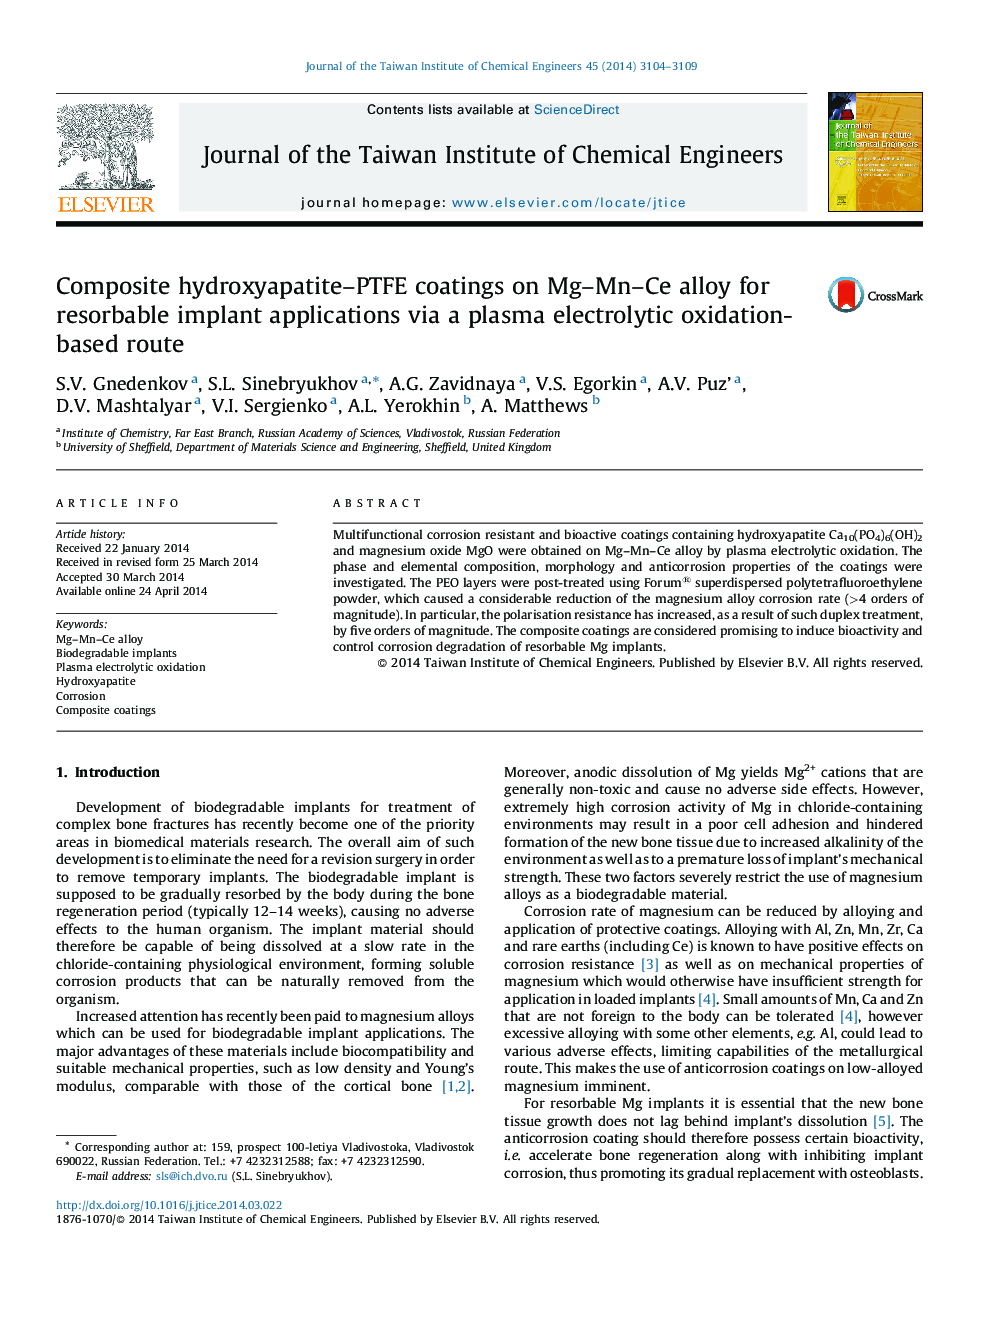 Composite hydroxyapatite–PTFE coatings on Mg–Mn–Ce alloy for resorbable implant applications via a plasma electrolytic oxidation-based route